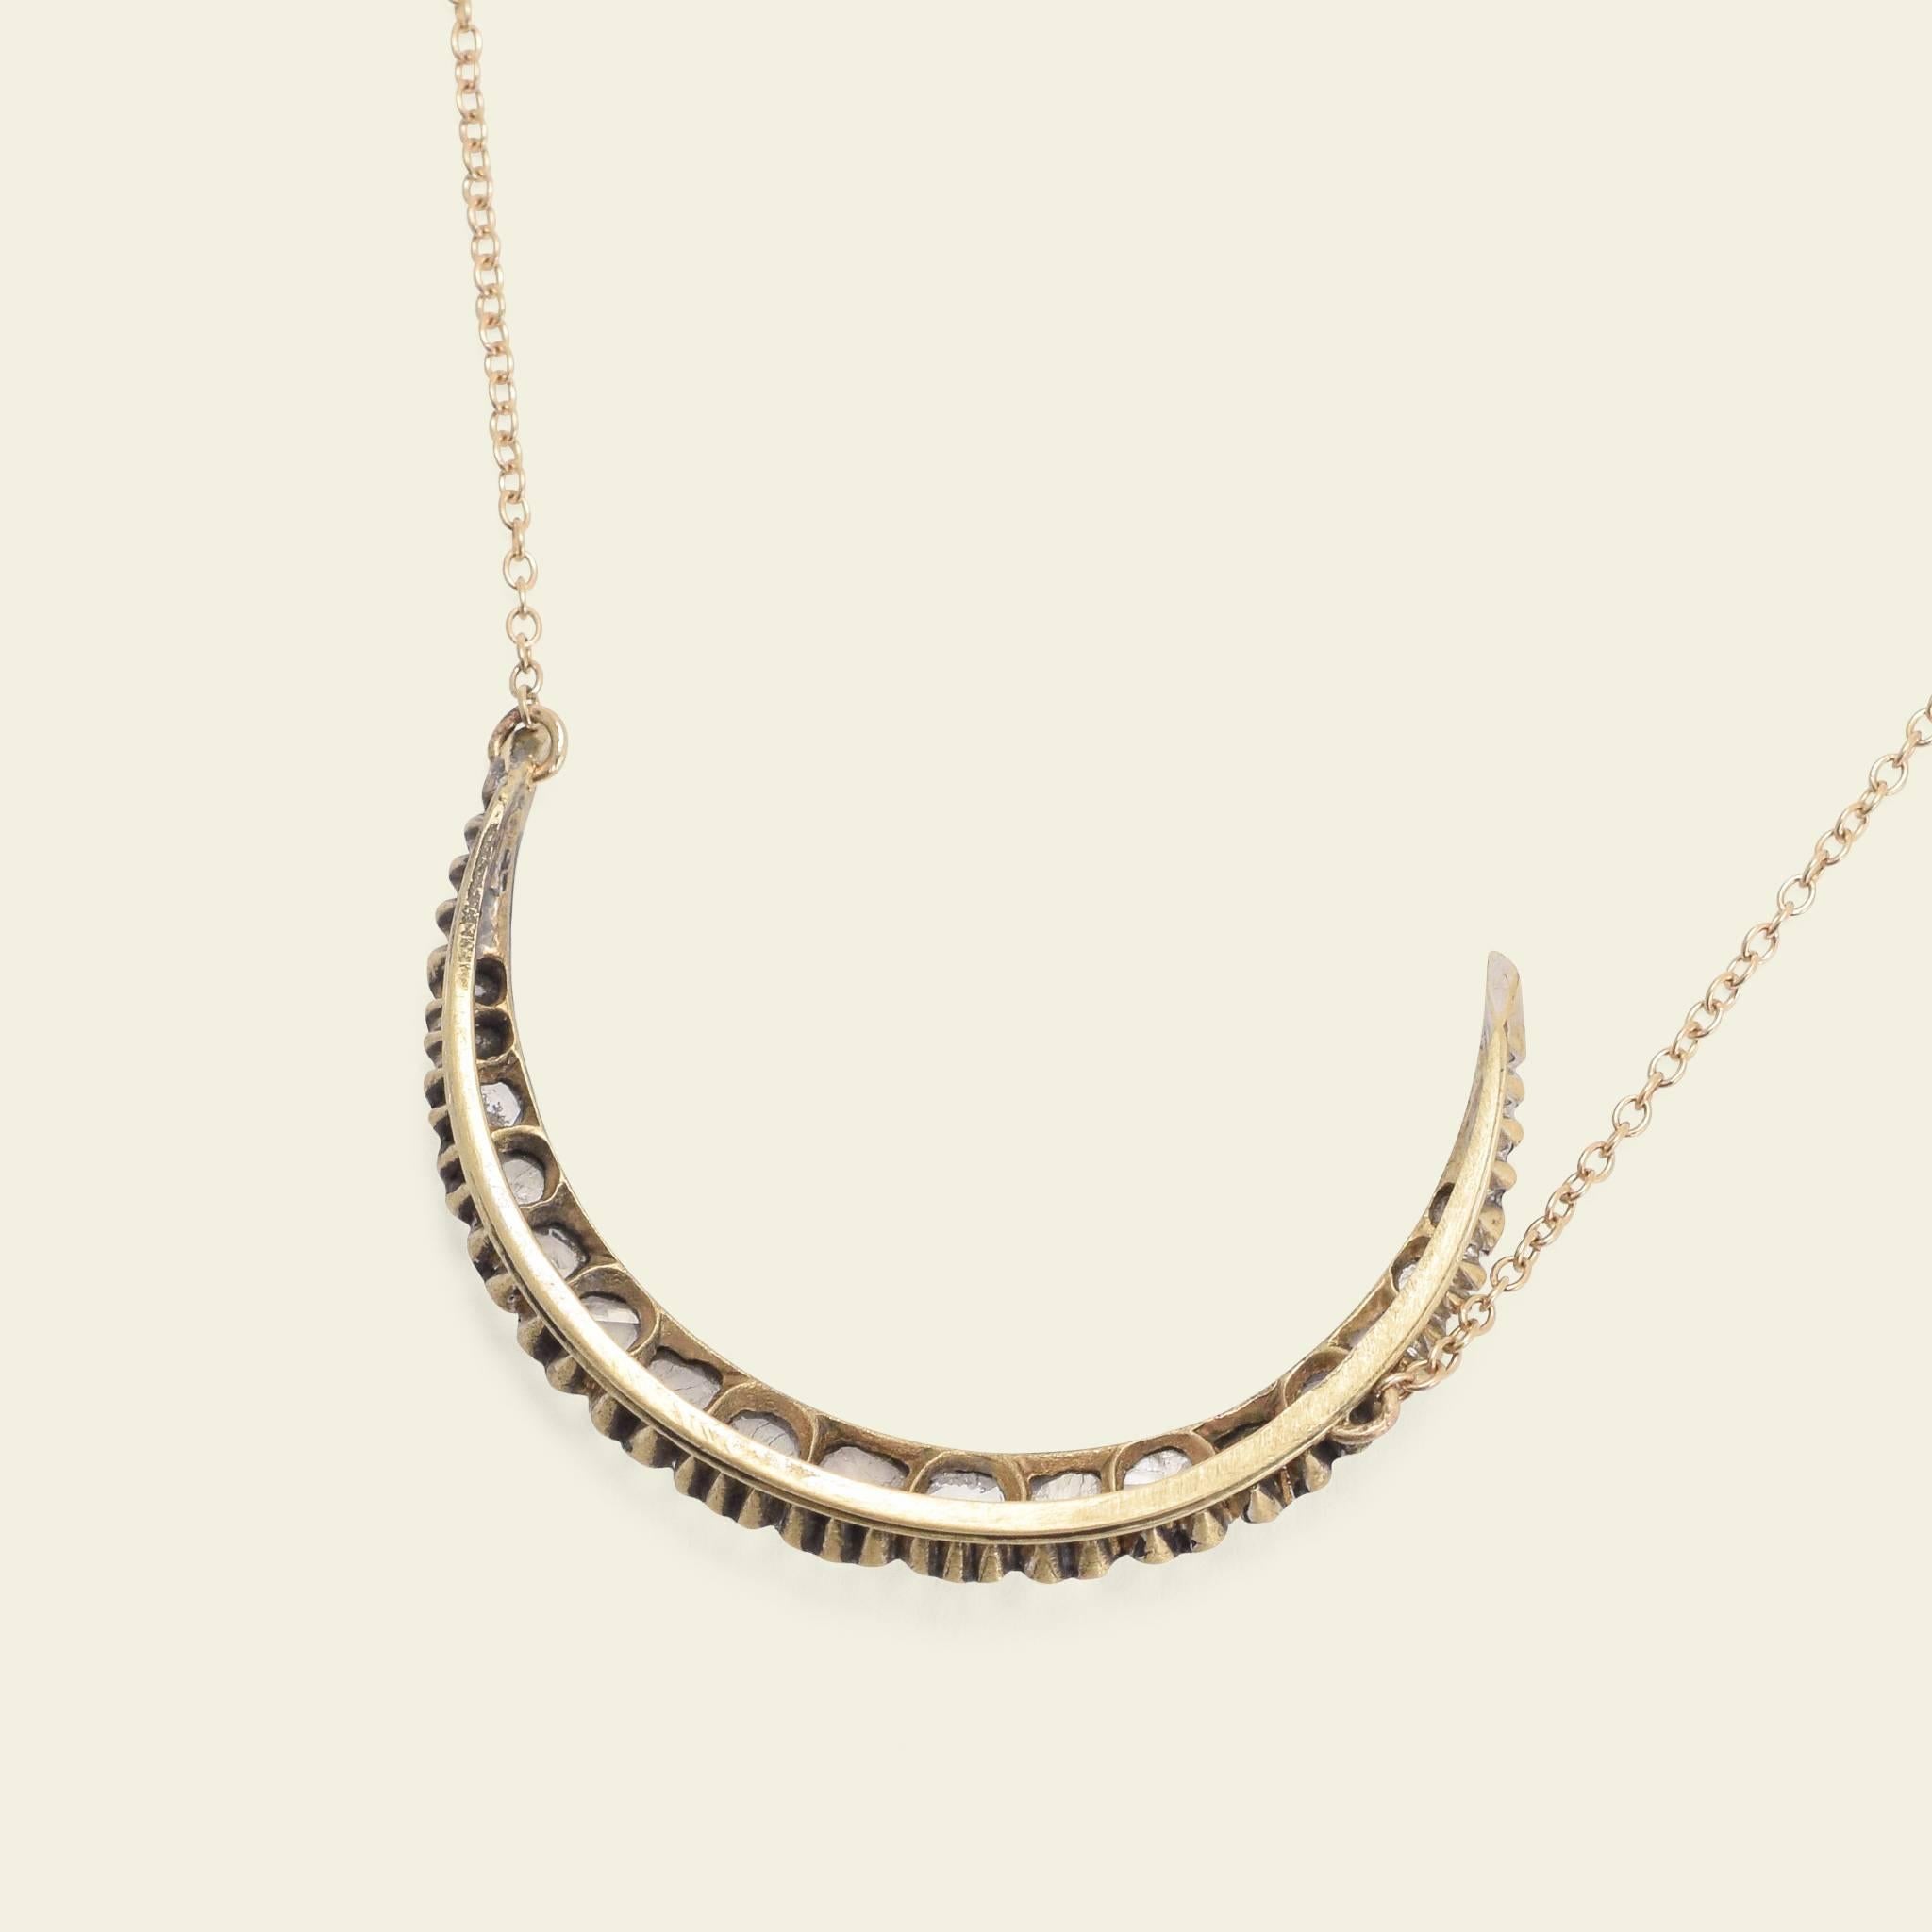 The crescent moon shape has been employed in jewelry design since time immemorial. The Victorians had a fascination with astronomy and were especially taken with the ever-changing moon. The moon - particularly in its crescent phase - can be seen